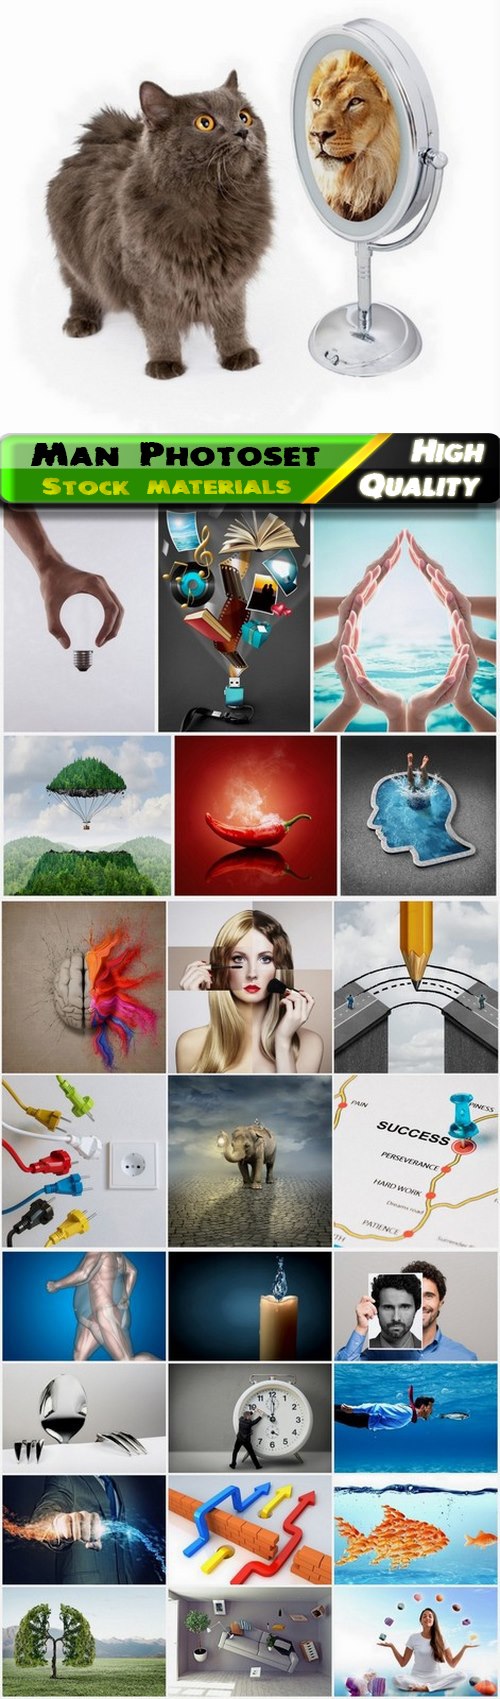 Interesting conceptual and creative images - 25 HQ Jpg